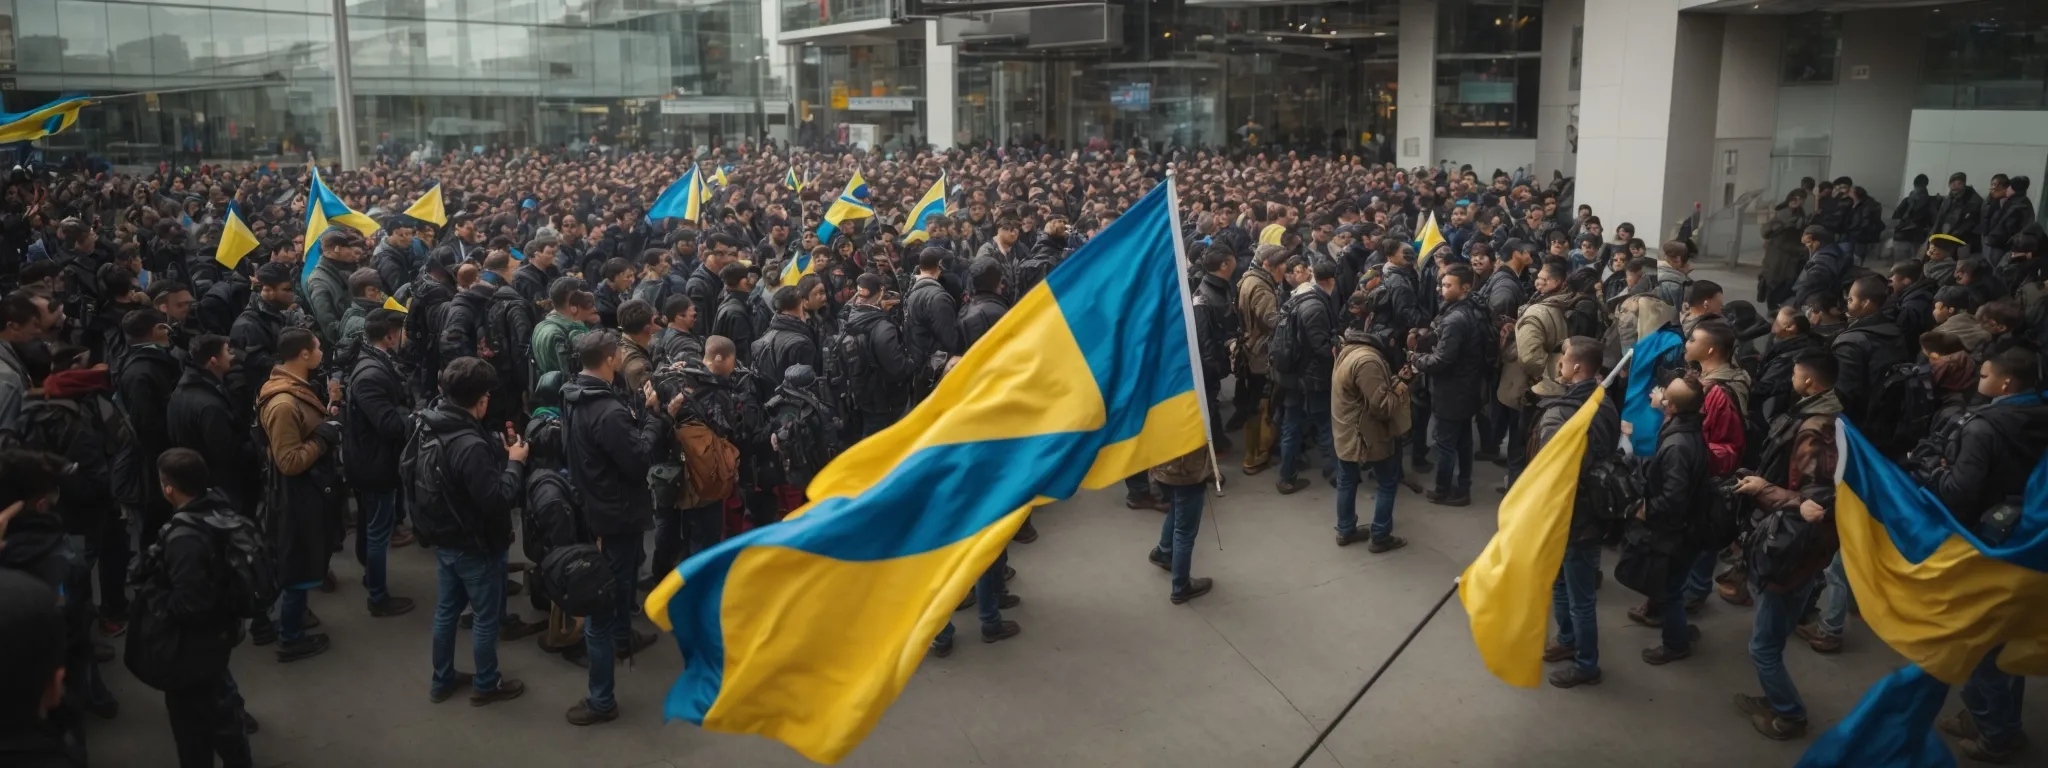 a vibrant ukrainian flag waves defiantly over a tech startup hub bustling with activity as strategists discuss innovative seo approaches.